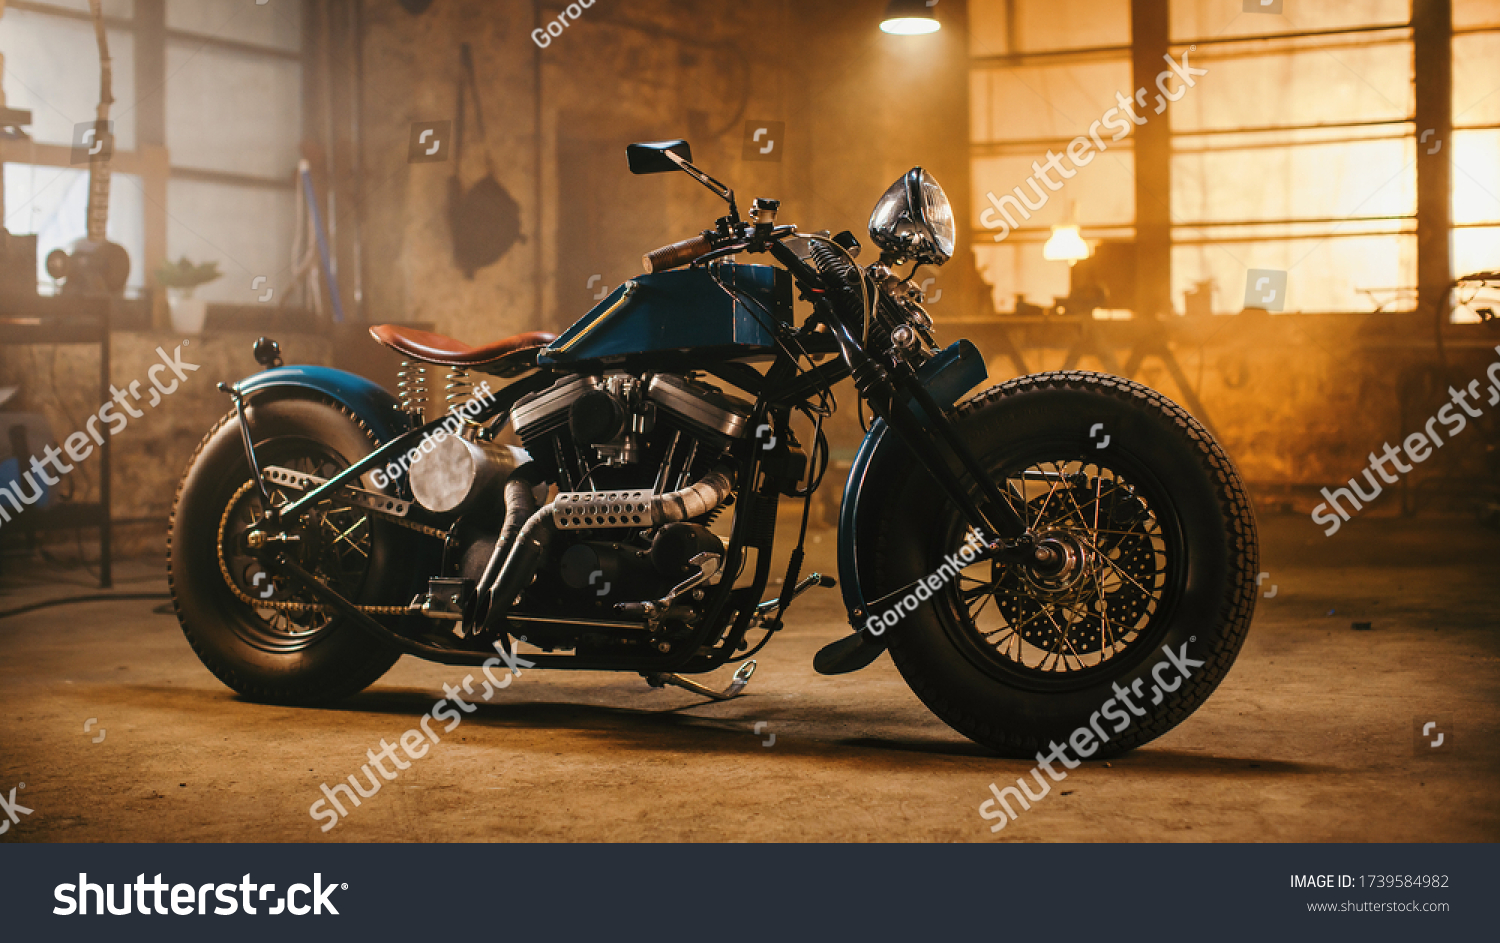 Custom Bobber Motorbike Standing in an Authentic Creative Workshop. Vintage Style Motorcycle Under Warm Lamp Light in a Garage. #1739584982